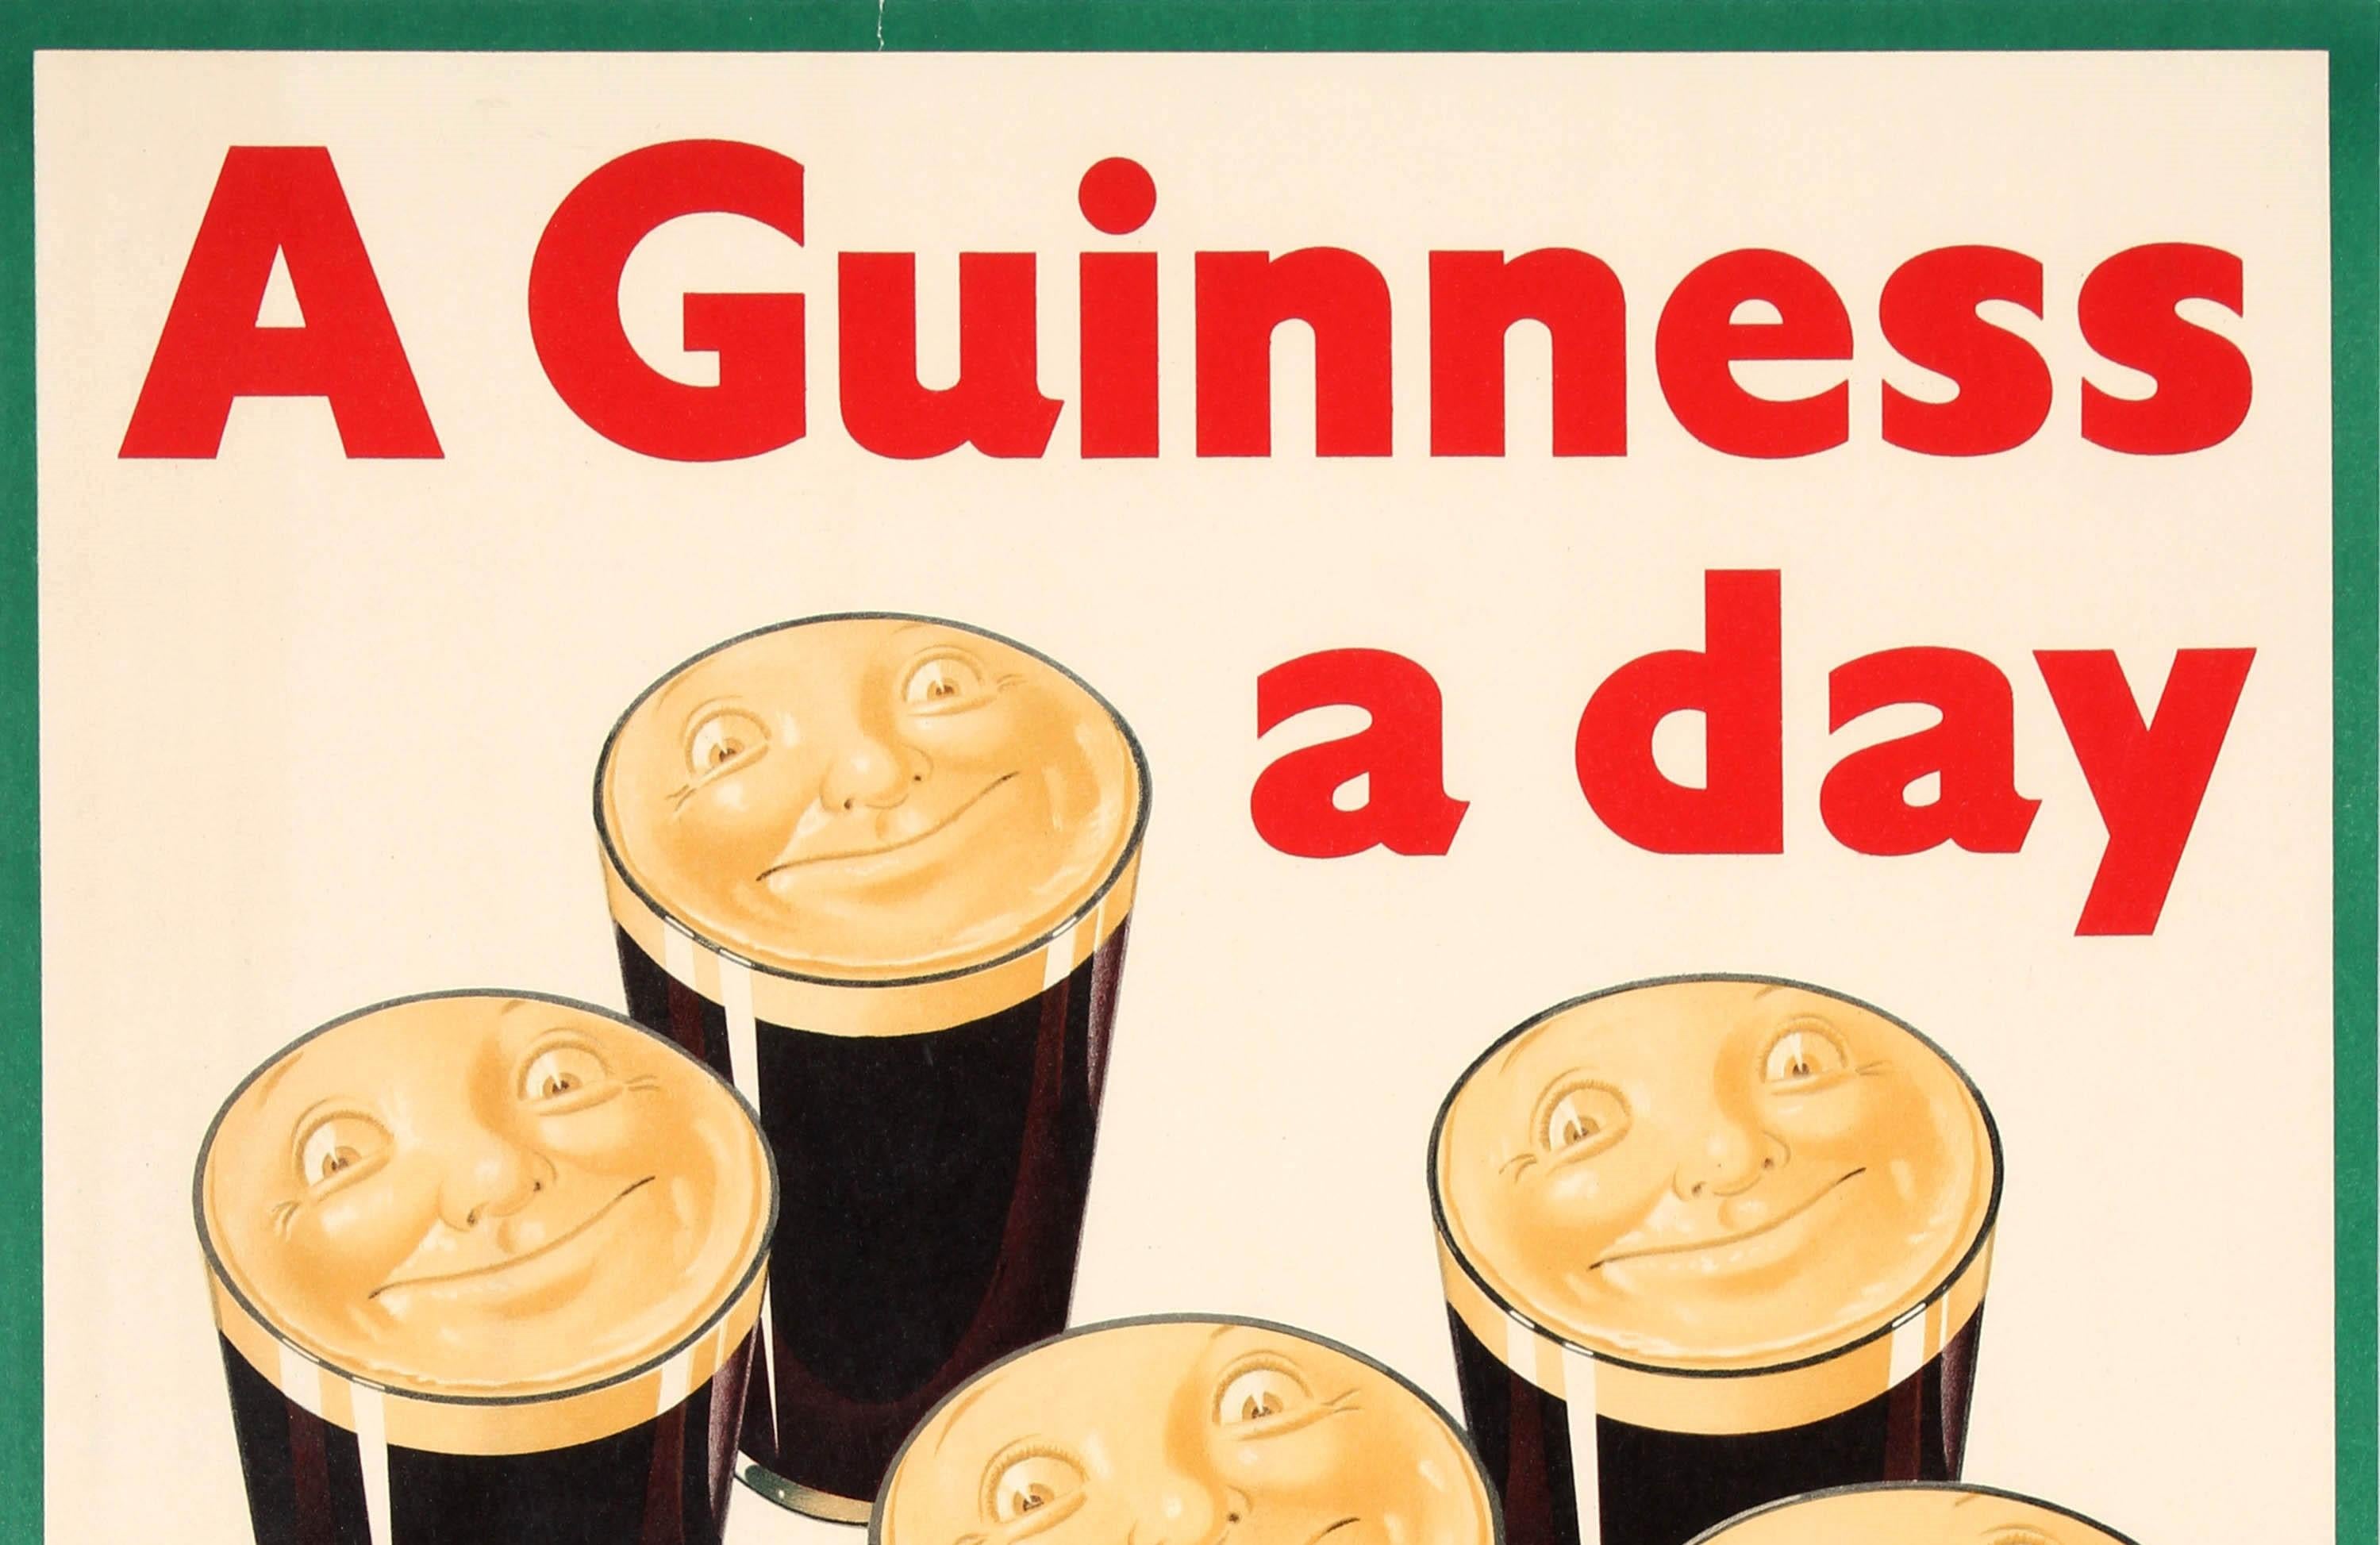 Original vintage iconic drink advertising poster: A Guinness a day Guinness is good for you. Great artwork featuring seven smiling pints of Guinness beer - one glass for each day of the week - with the text above and below in stylised red and black